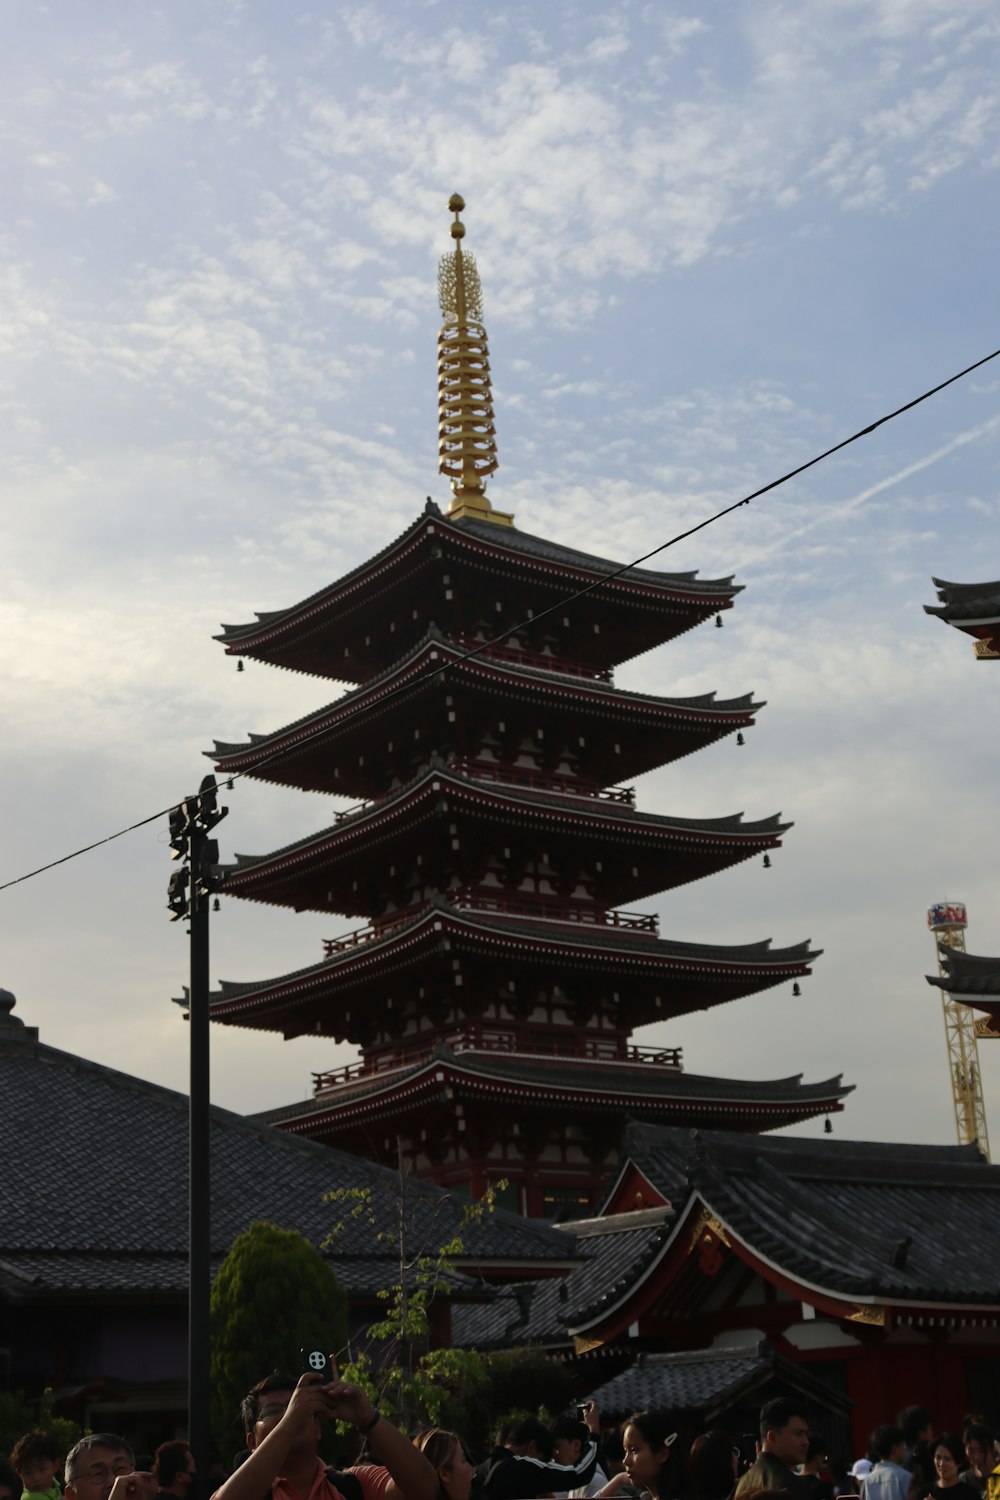 a group of people standing in front of a tall pagoda